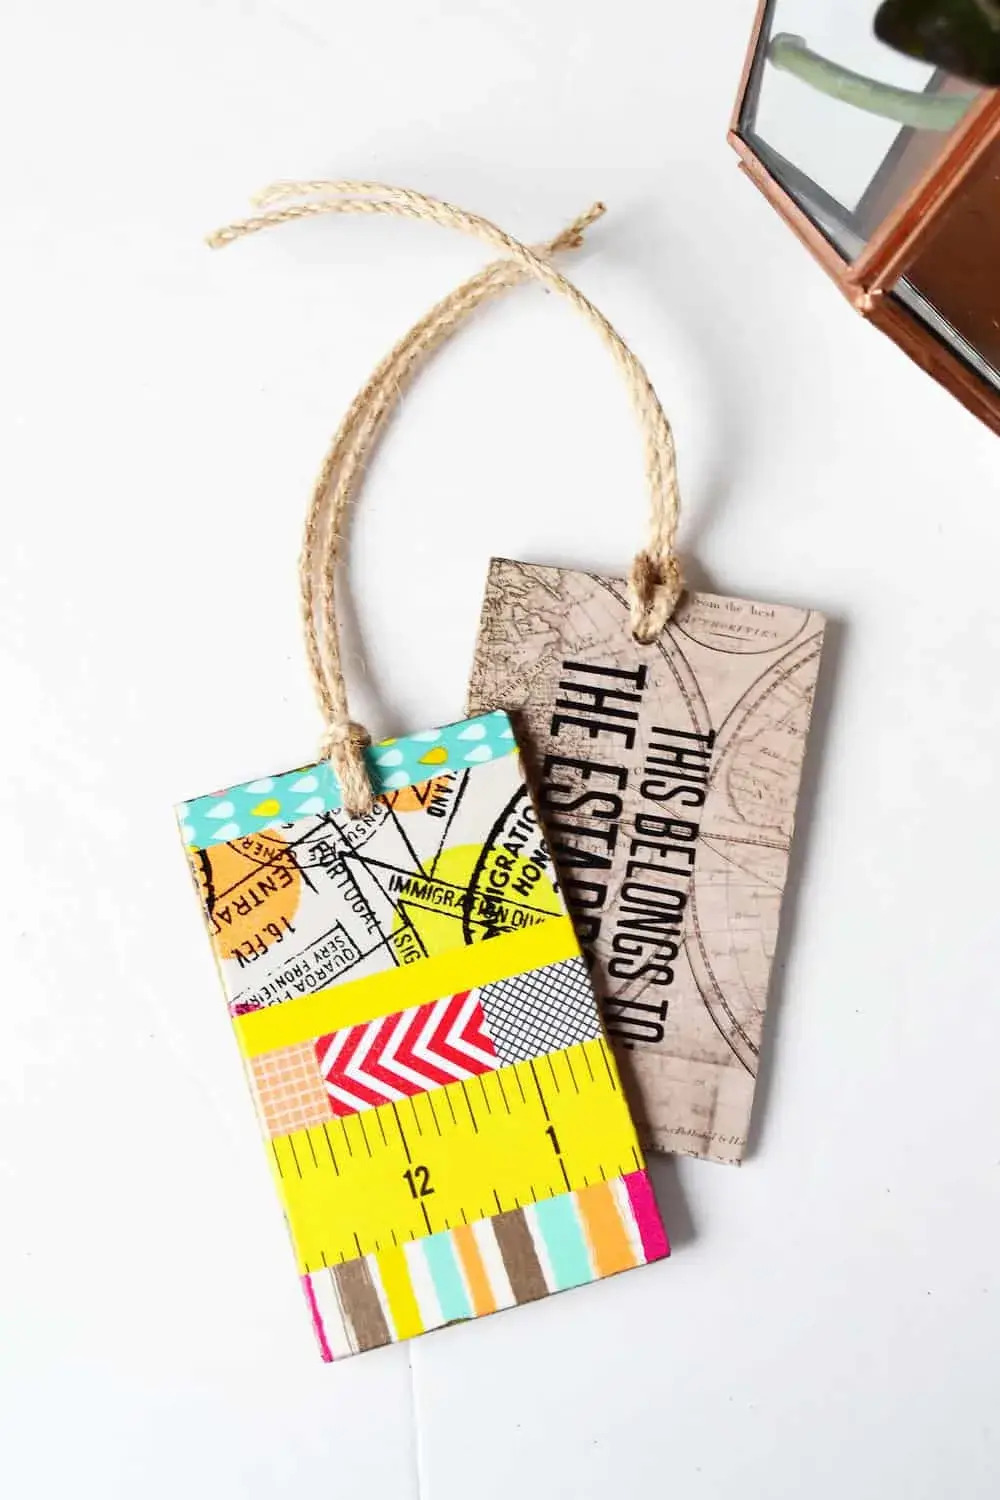 Cute Luggage Tags Craft With Jute Twine, Washi Tape & Scrapbook Paper - Make Something Special with Washi Tape